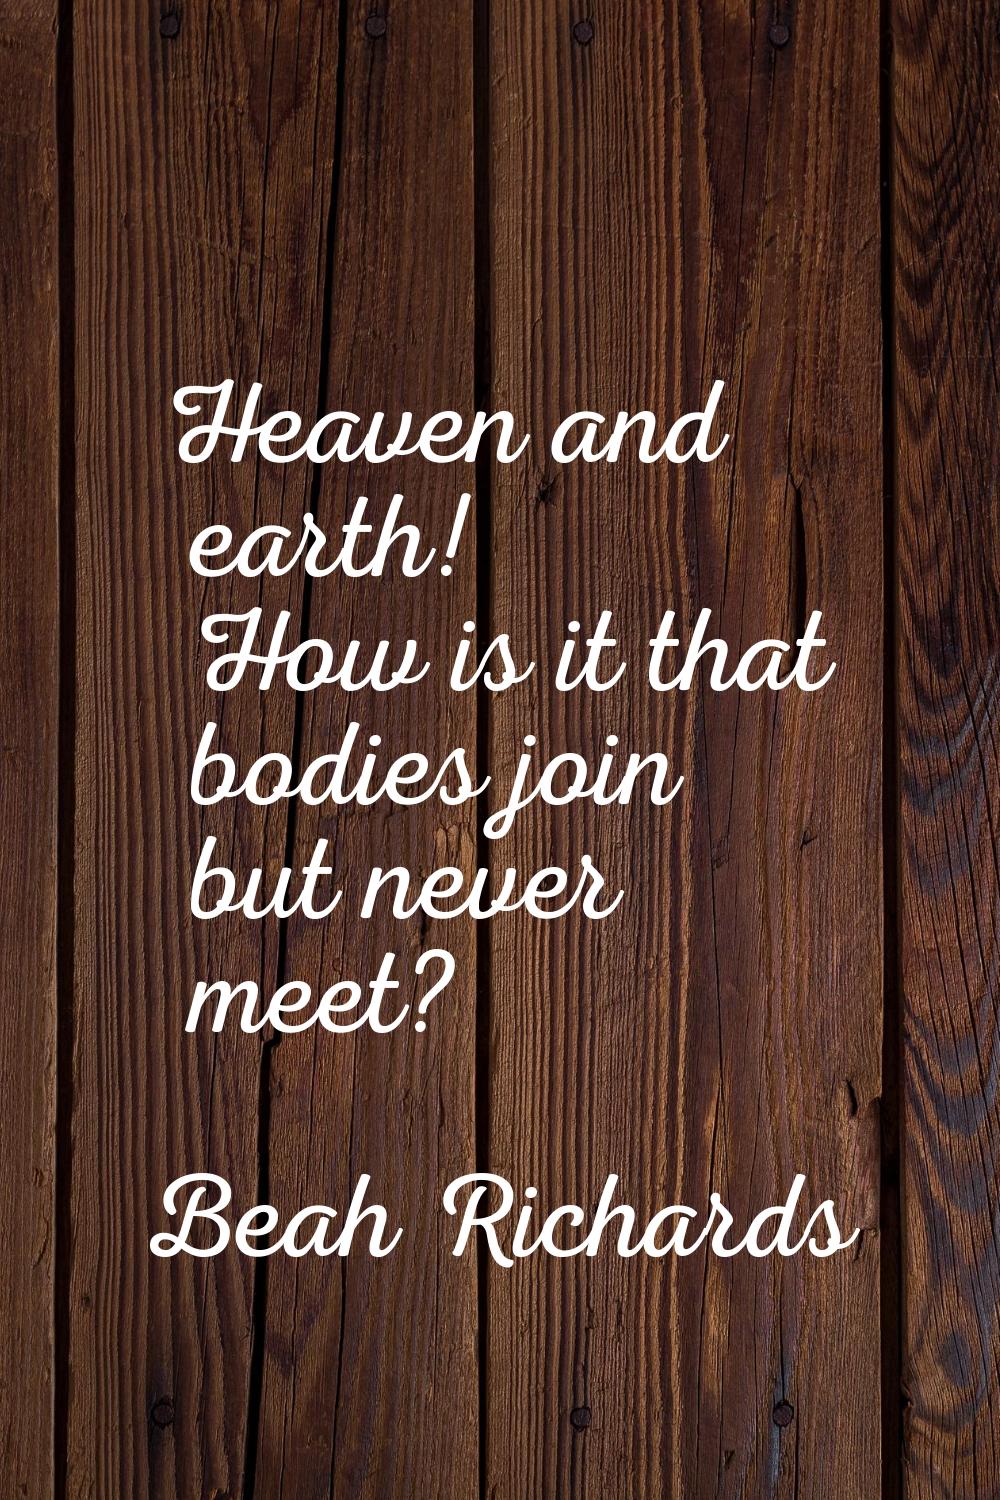 Heaven and earth! How is it that bodies join but never meet?